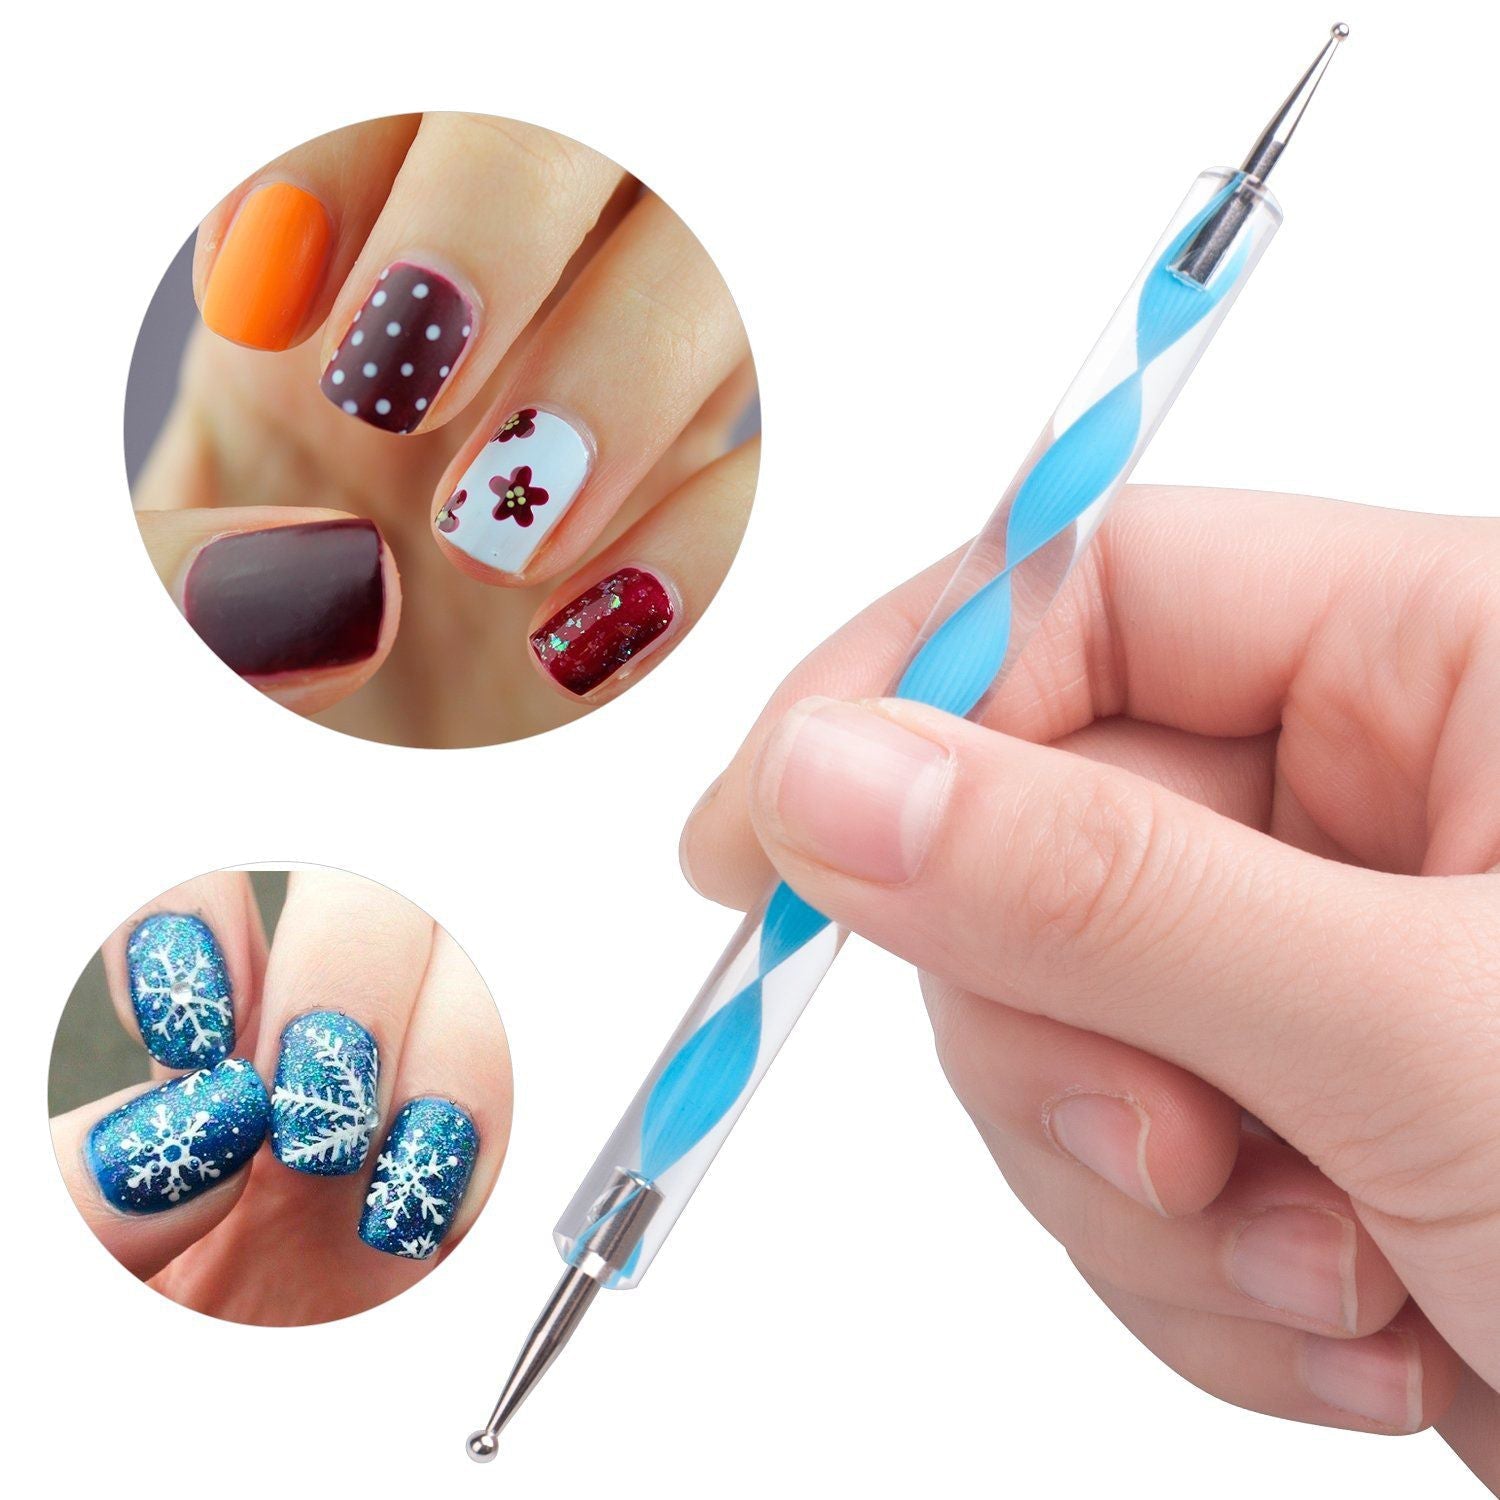 6020 Nail Art Point Pen and Set Used by Women’s and Ladies for Their Fashion Purposes.